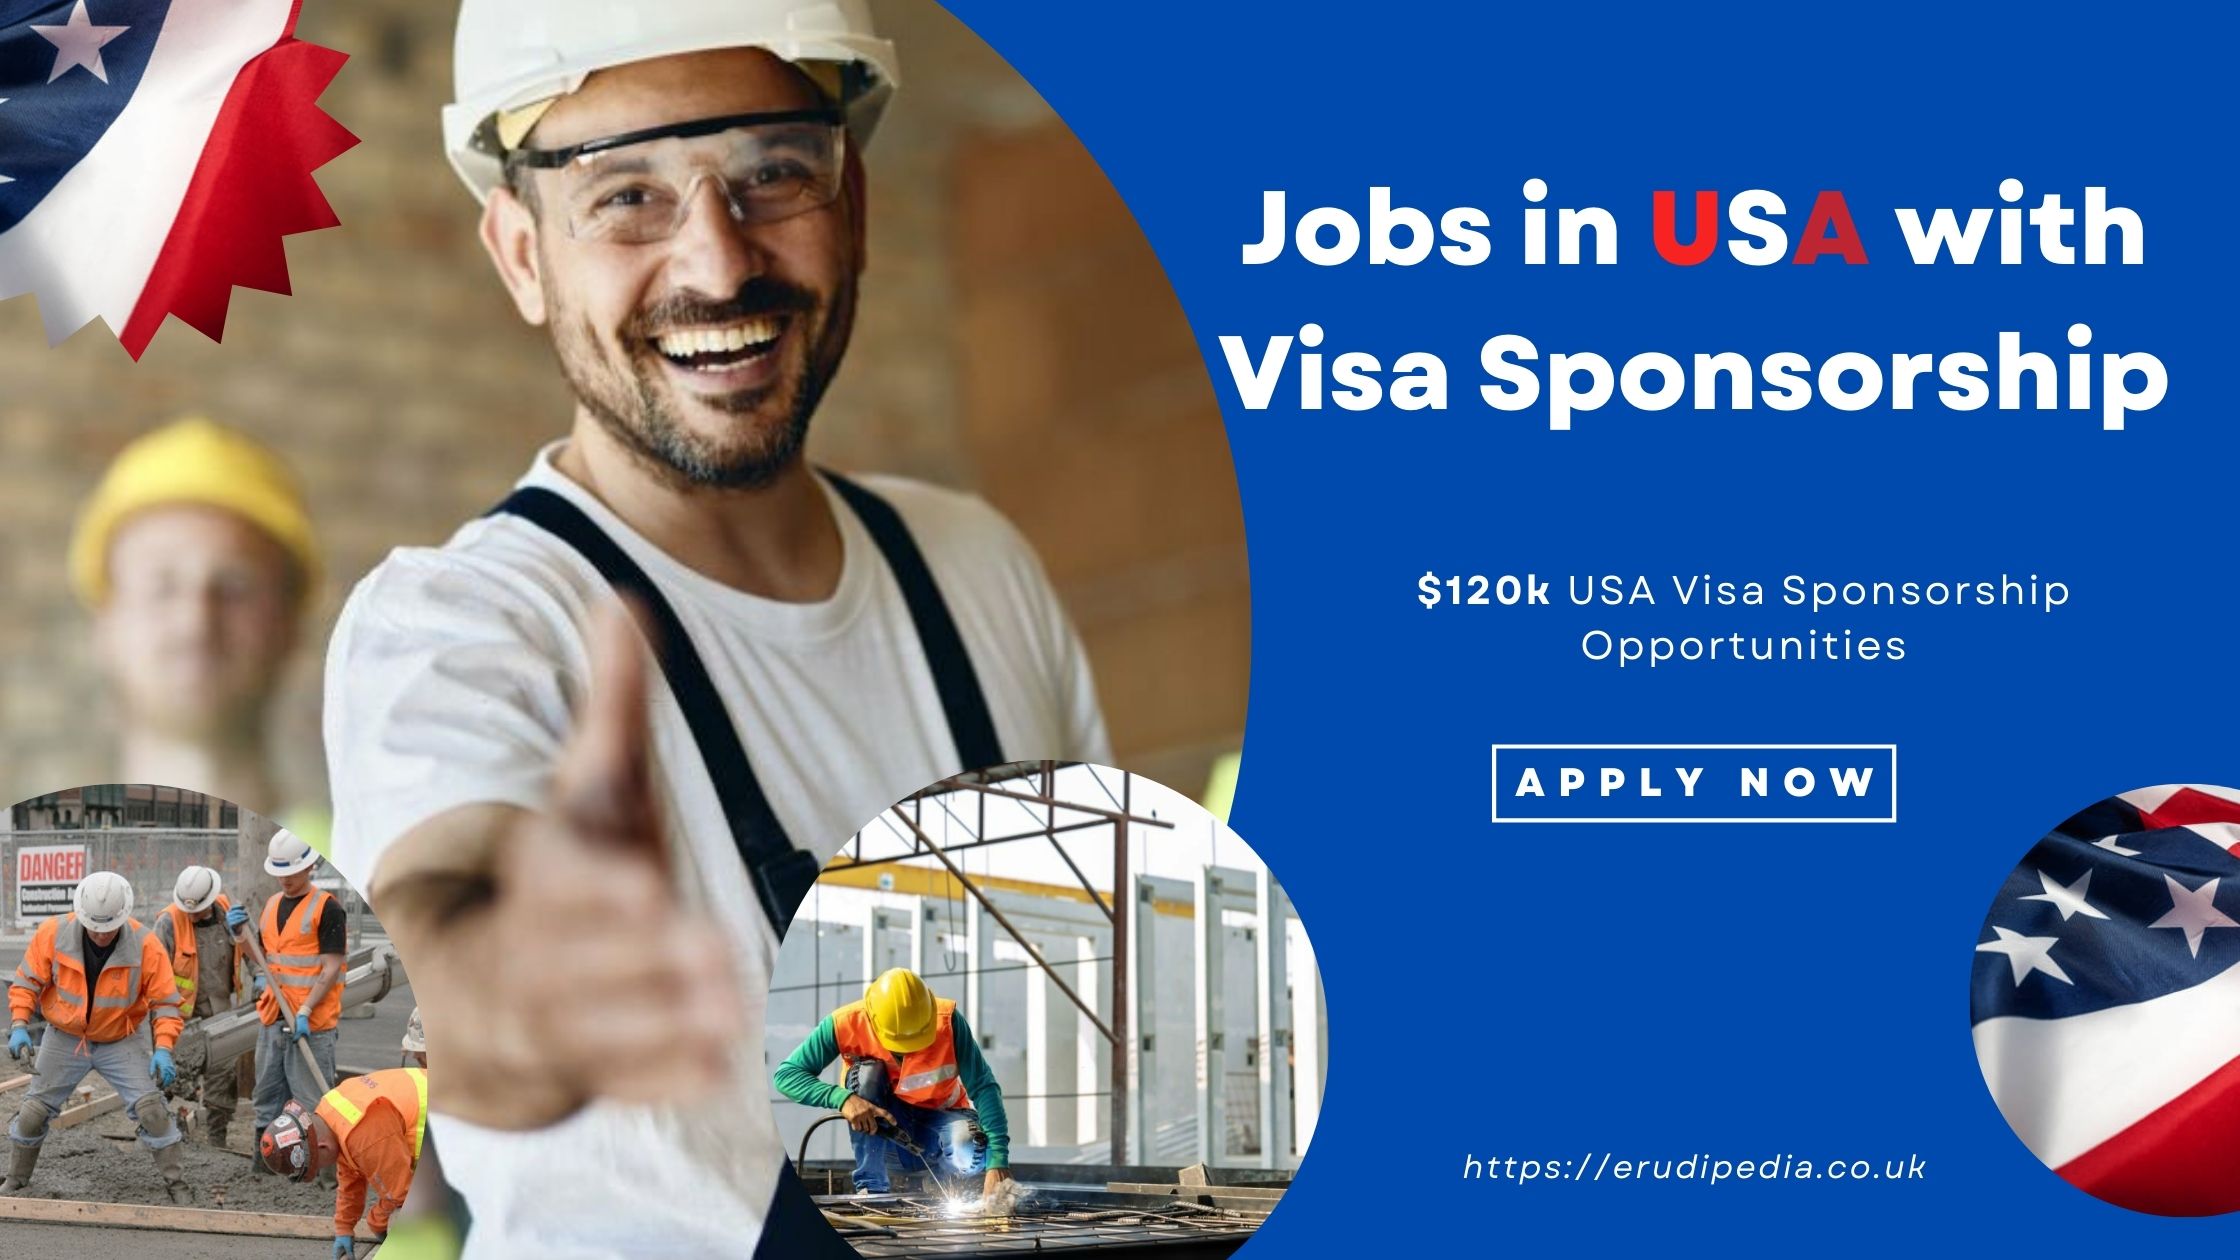 Jobs in USA with Visa Sponsorship - Apply Now